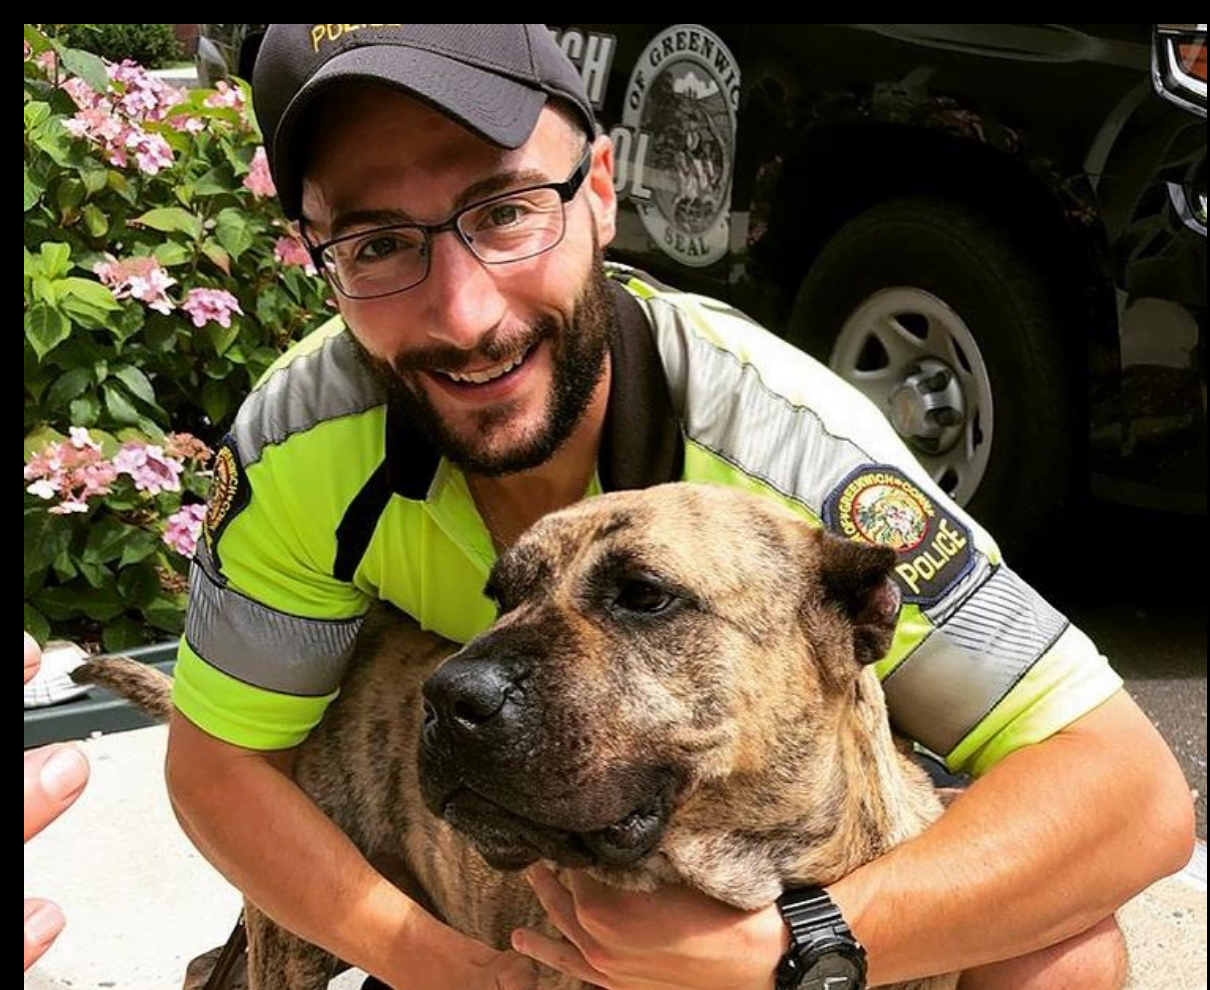 Officer O'Connor with Henry. Photo: Greenwich Police Silver Shield Association Facebook